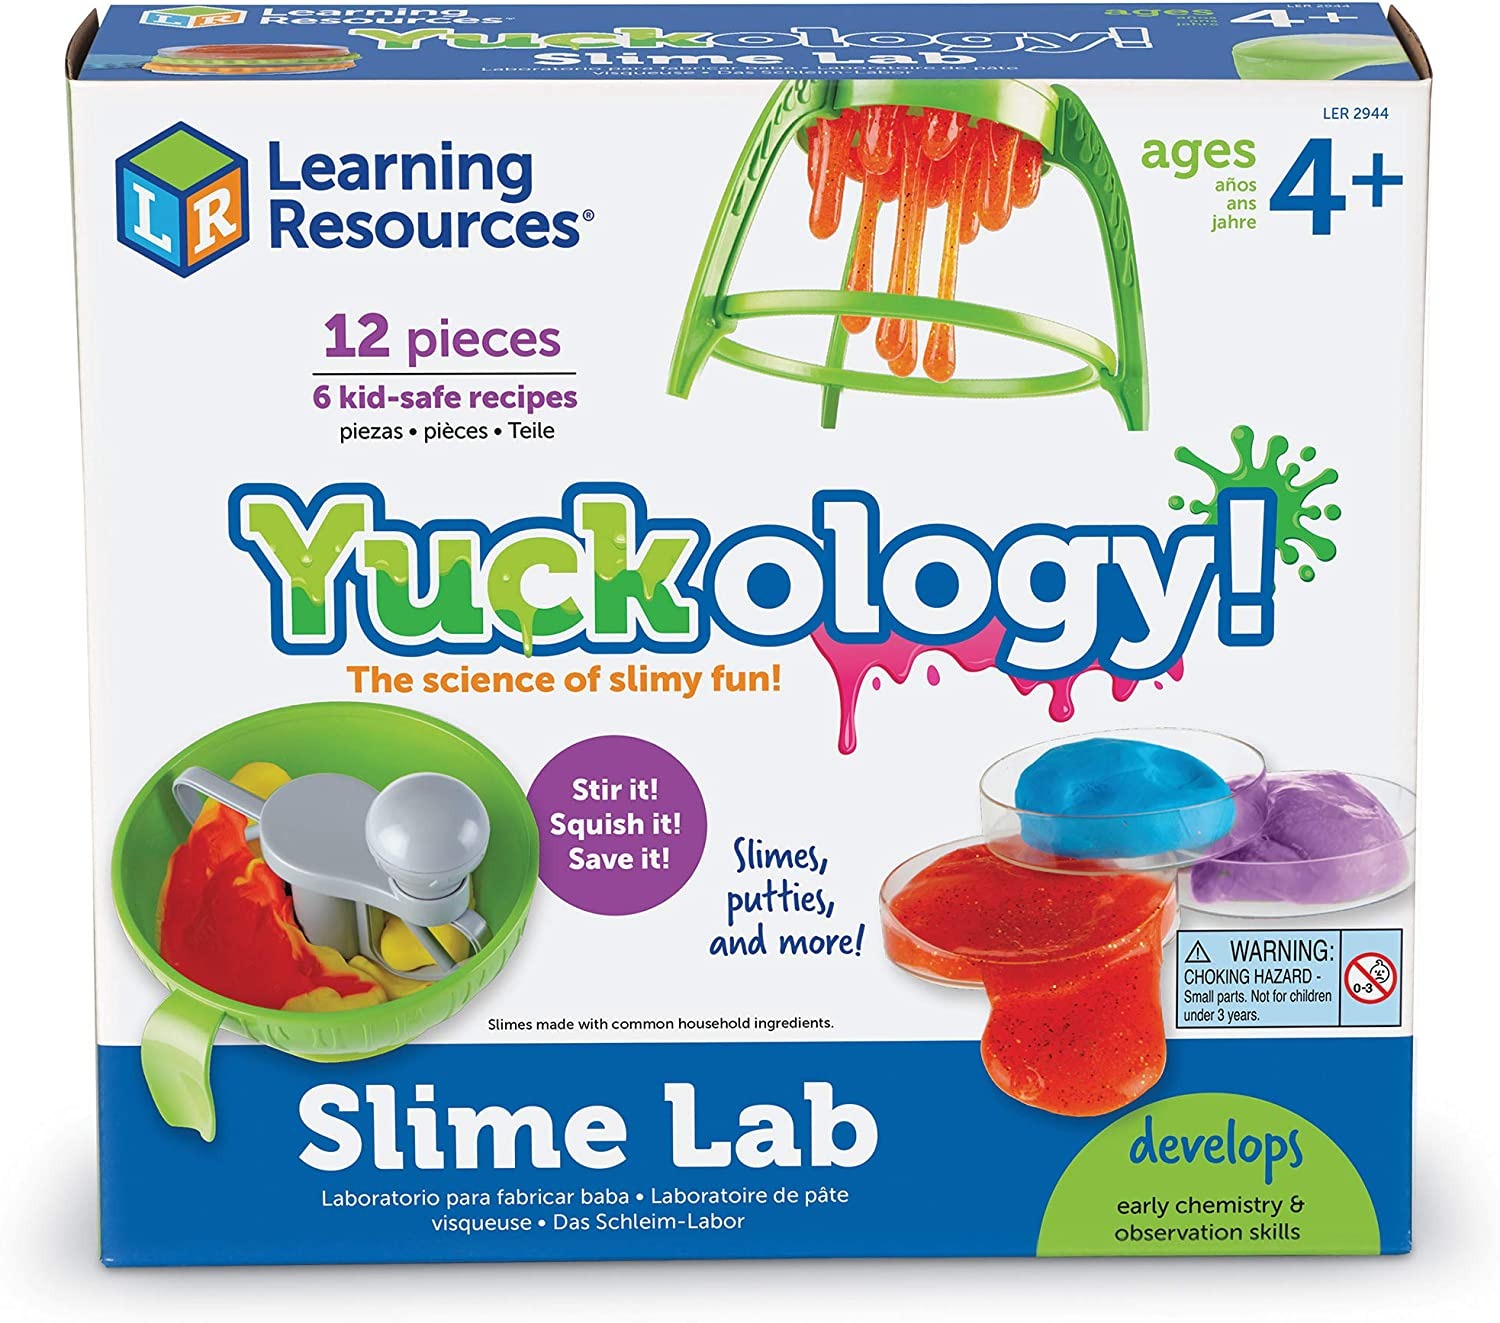 Learning Resources Yuckology Slime Lab, Yuck! Make and store your grossest goo with the Yuckology! Slime Lab. Use the Yuckology Slime Lab to get messy with some super slime making, action fun! The Yuckology! Slime lab allows children to learn the science behind how to make slime in a fun and exiting lab like environment. The Yuckology Slime Lab has easy to use hands-on tools and easy child-friendly recipes which develops early science skill development. Using common ingredients found around the house and ch